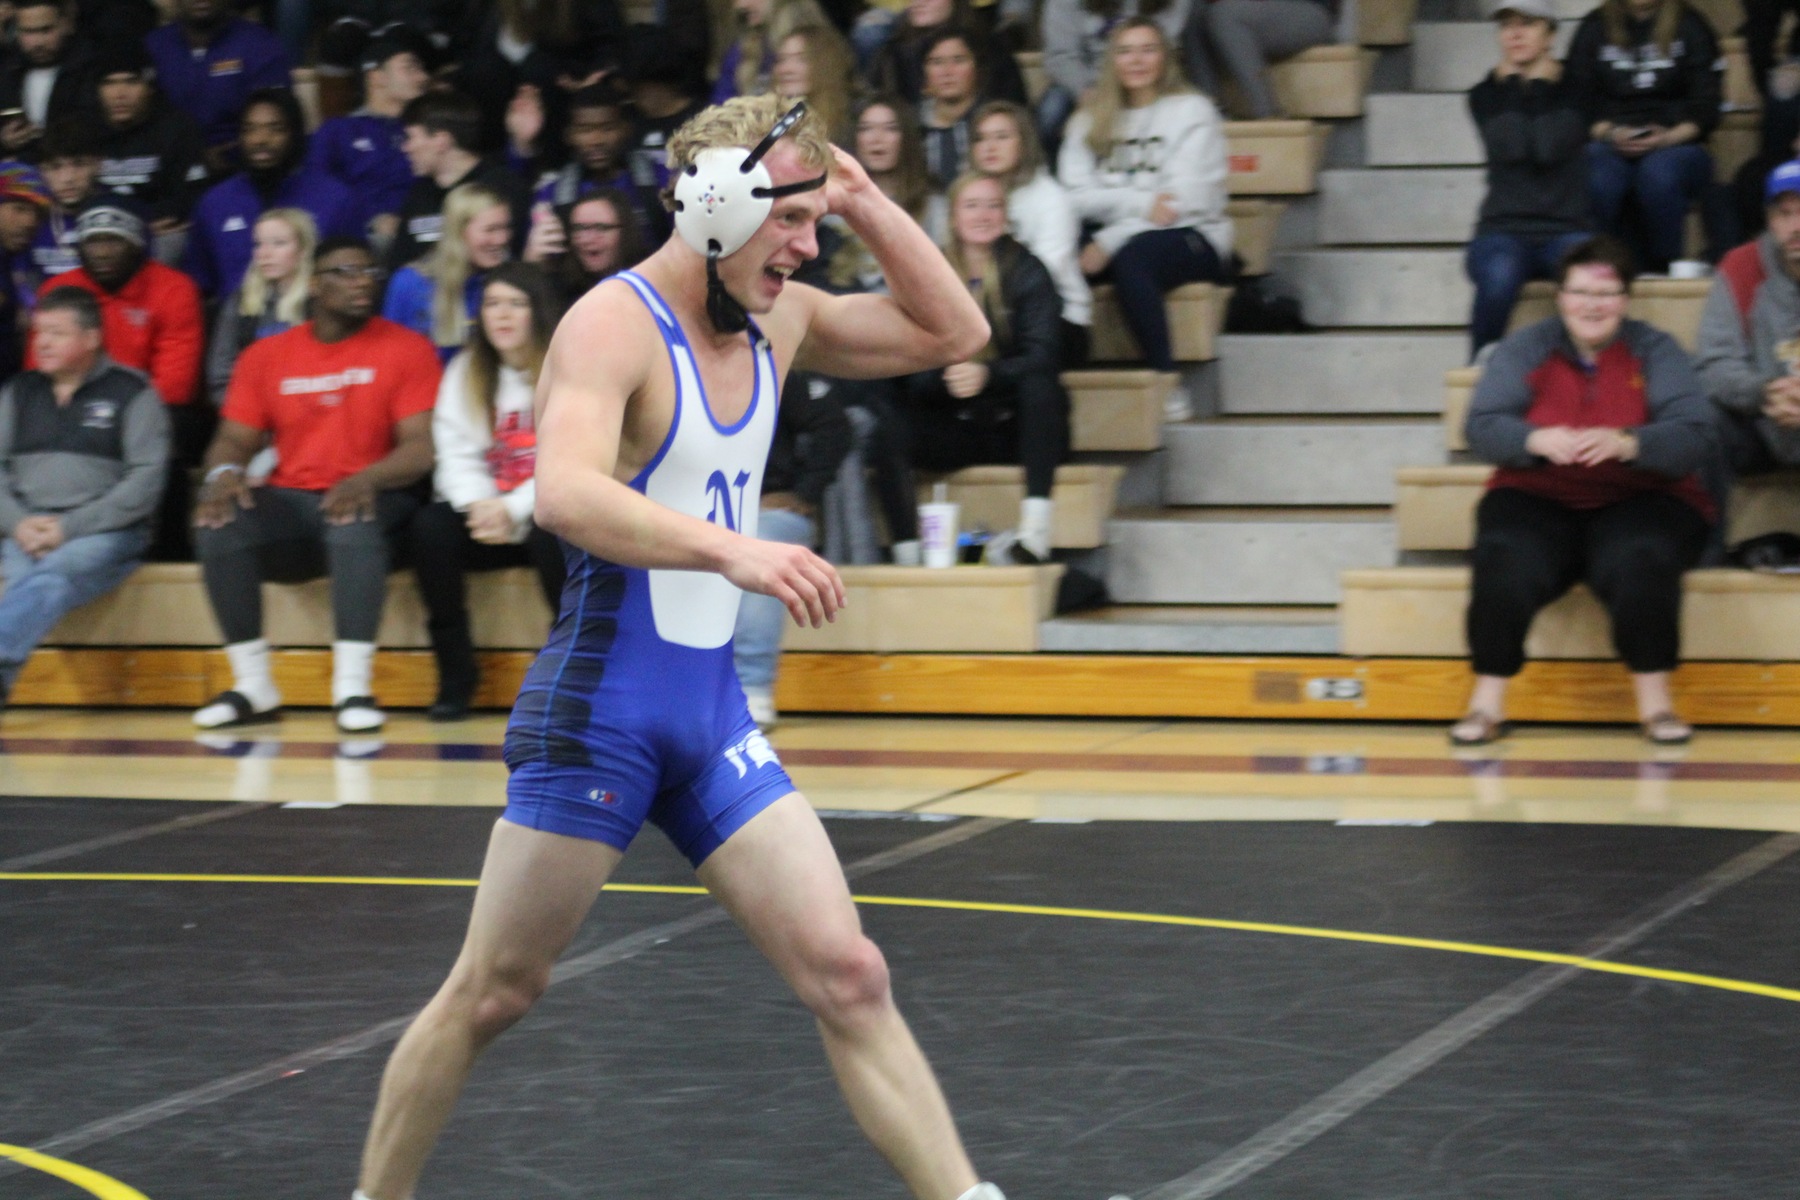 NIACC's Brock Luthens comes off the mat after his upset over top-ranked Hector Candelaria of Ellsworth on Wednesday.